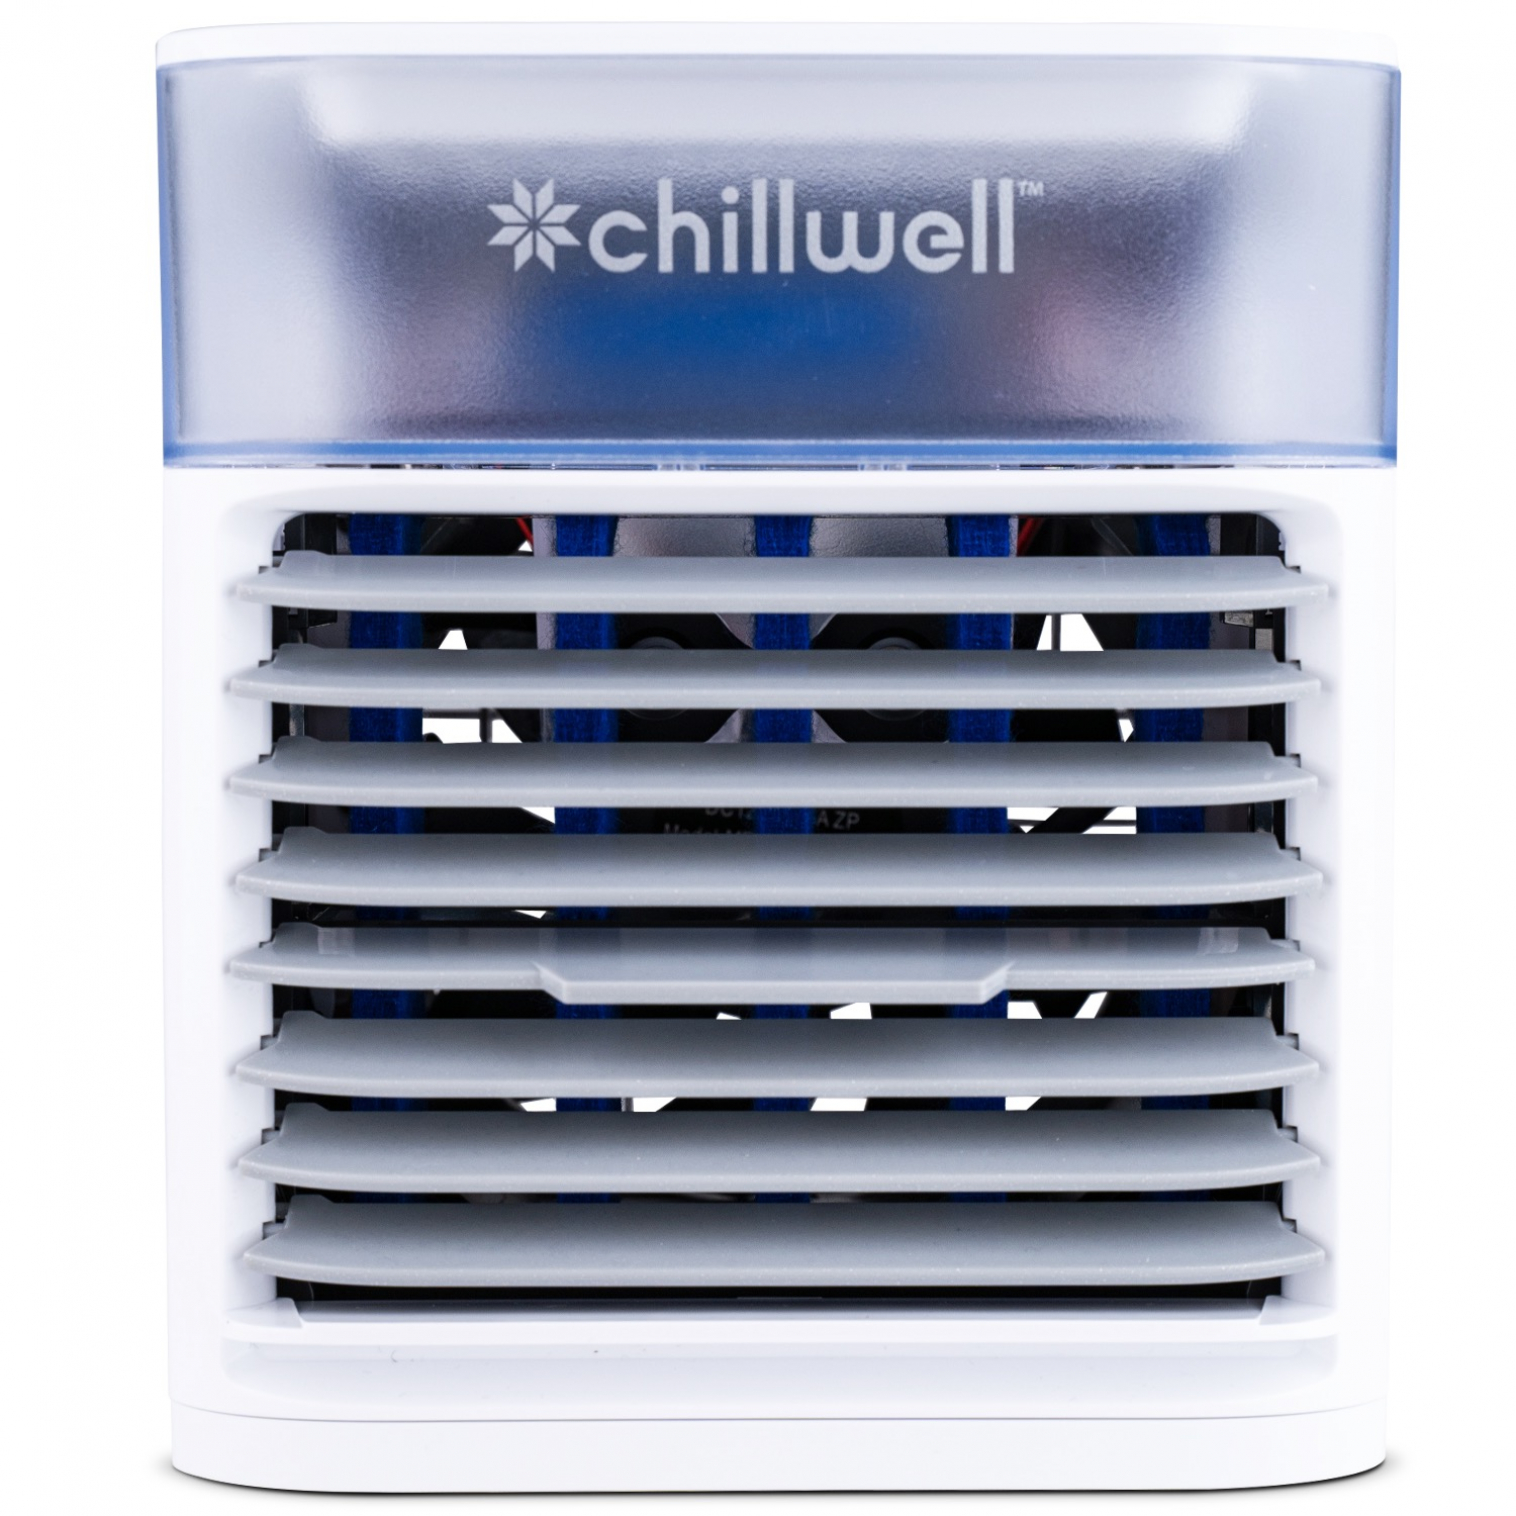 Chillwell AC Portable Ac Price